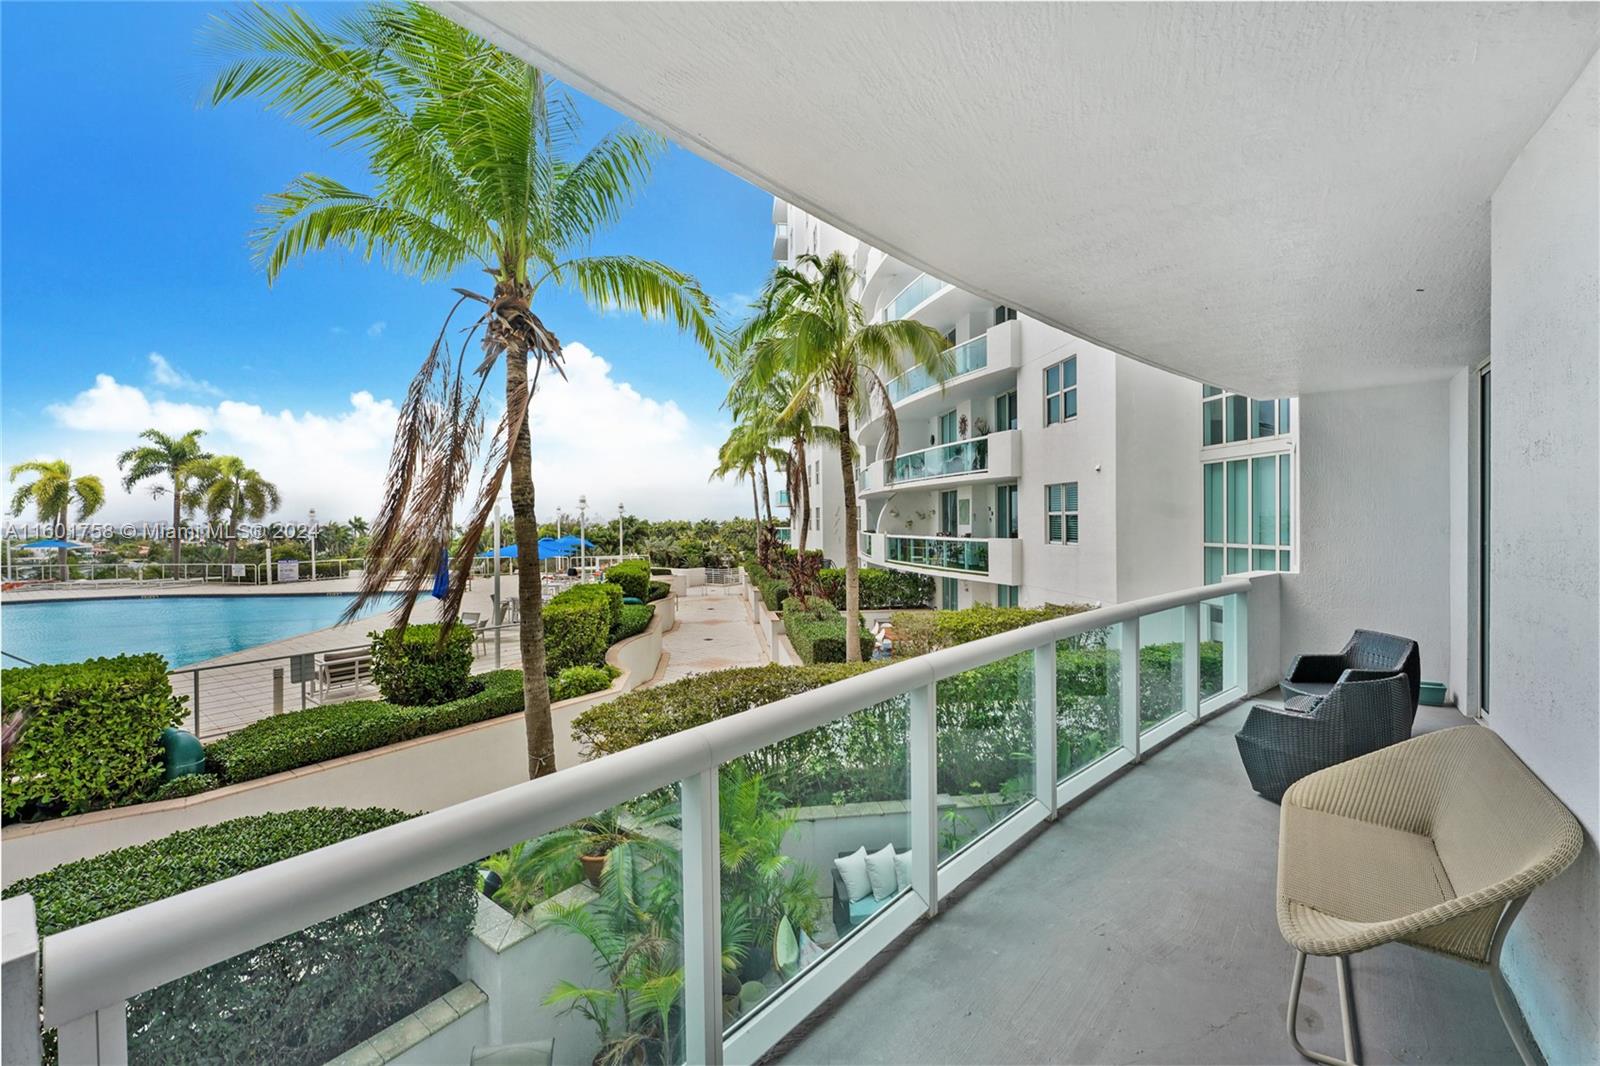 Beautiful 360 Condo in North Bay Village, nestled between Miami Beach and Miami. Impeccably managed, this boutique building offers secured grounds, a privately managed marina, fitness center, and a resort style pool. The unit boasts an elevated pool view for complete privacy, featuring an ensuite primary bedroom, guest bedroom, full bath, spacious living room, and formal dining area. Priced to sell quickly, and easy to show.